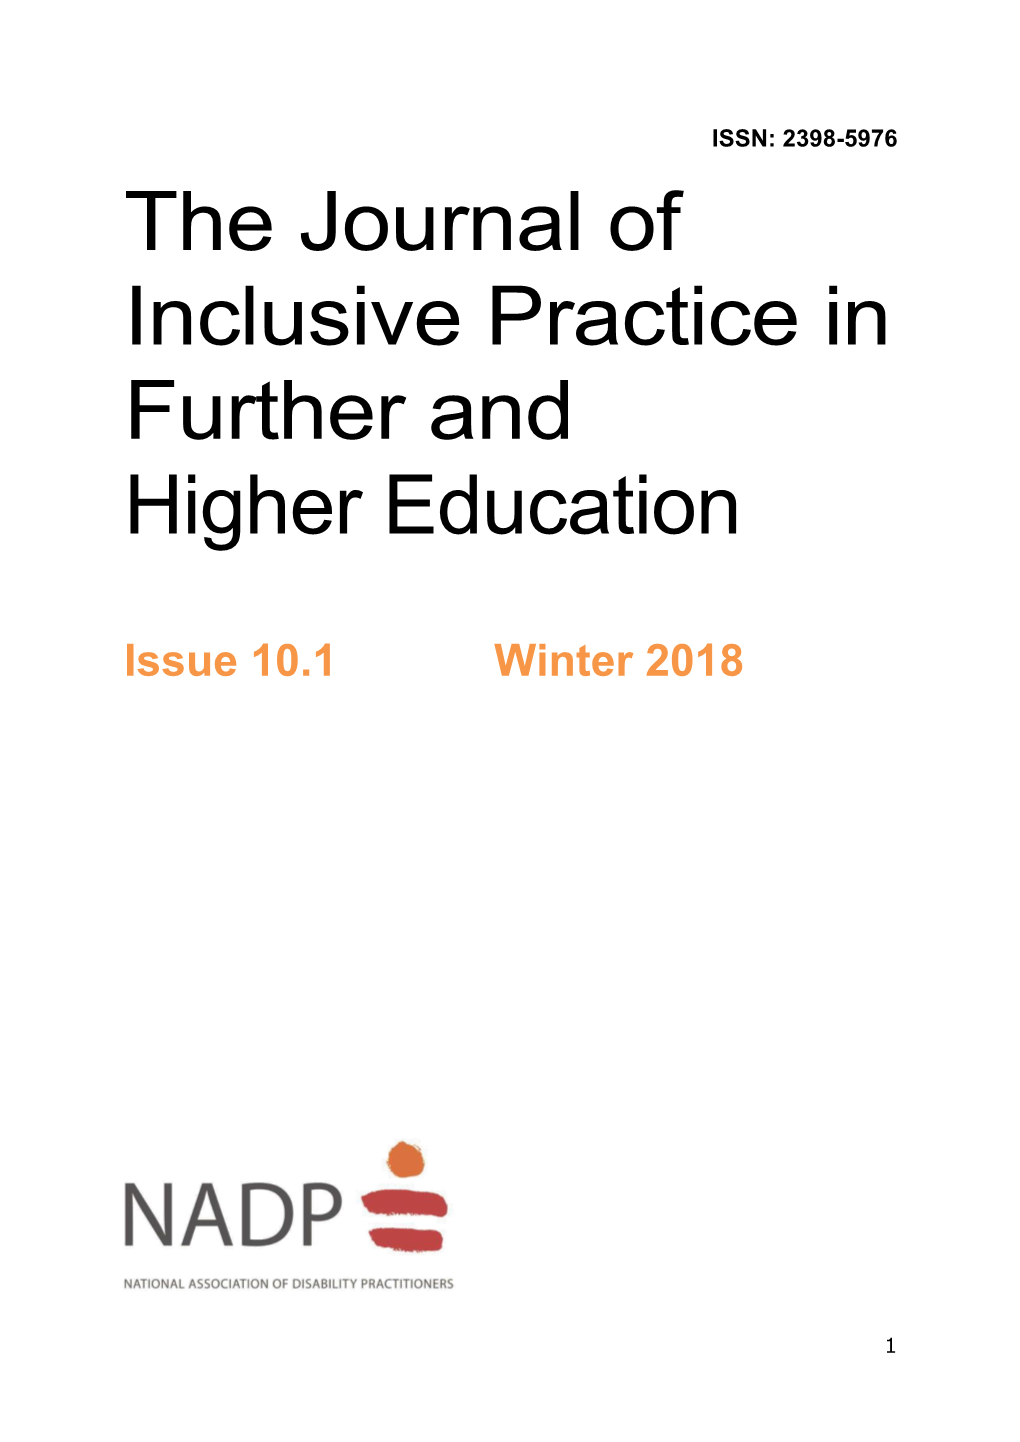 The Journal of Inclusive Practice in Further and Higher Education